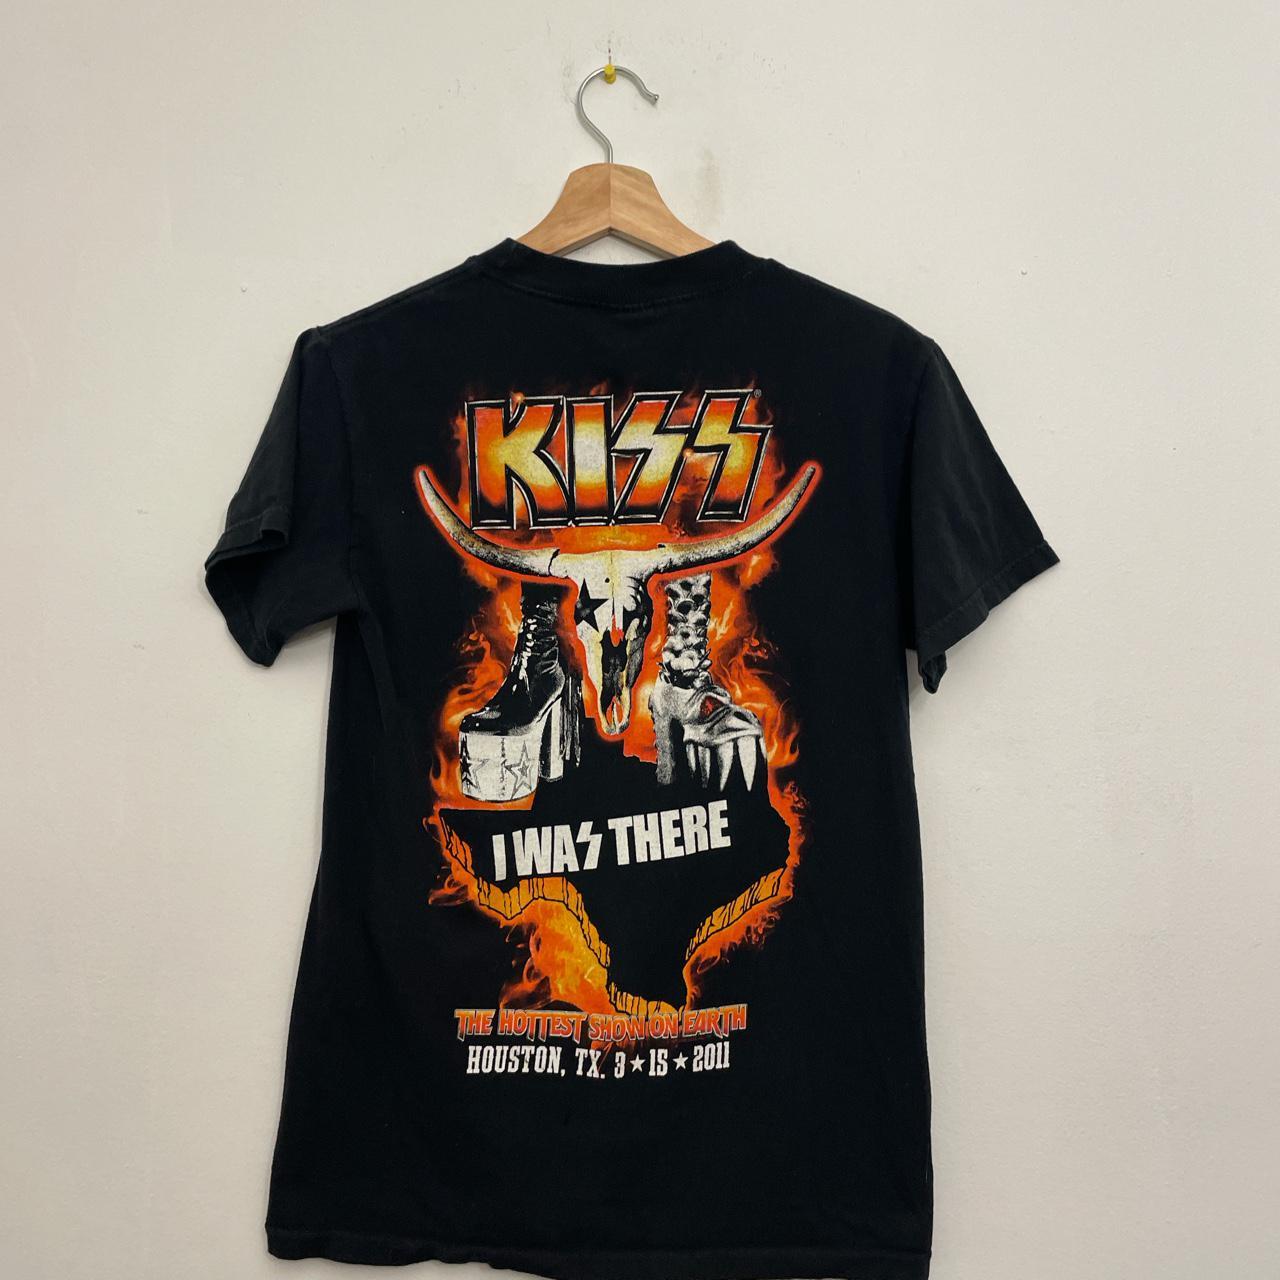 Product Image 3 - Kiss I Was There tee
Crazy